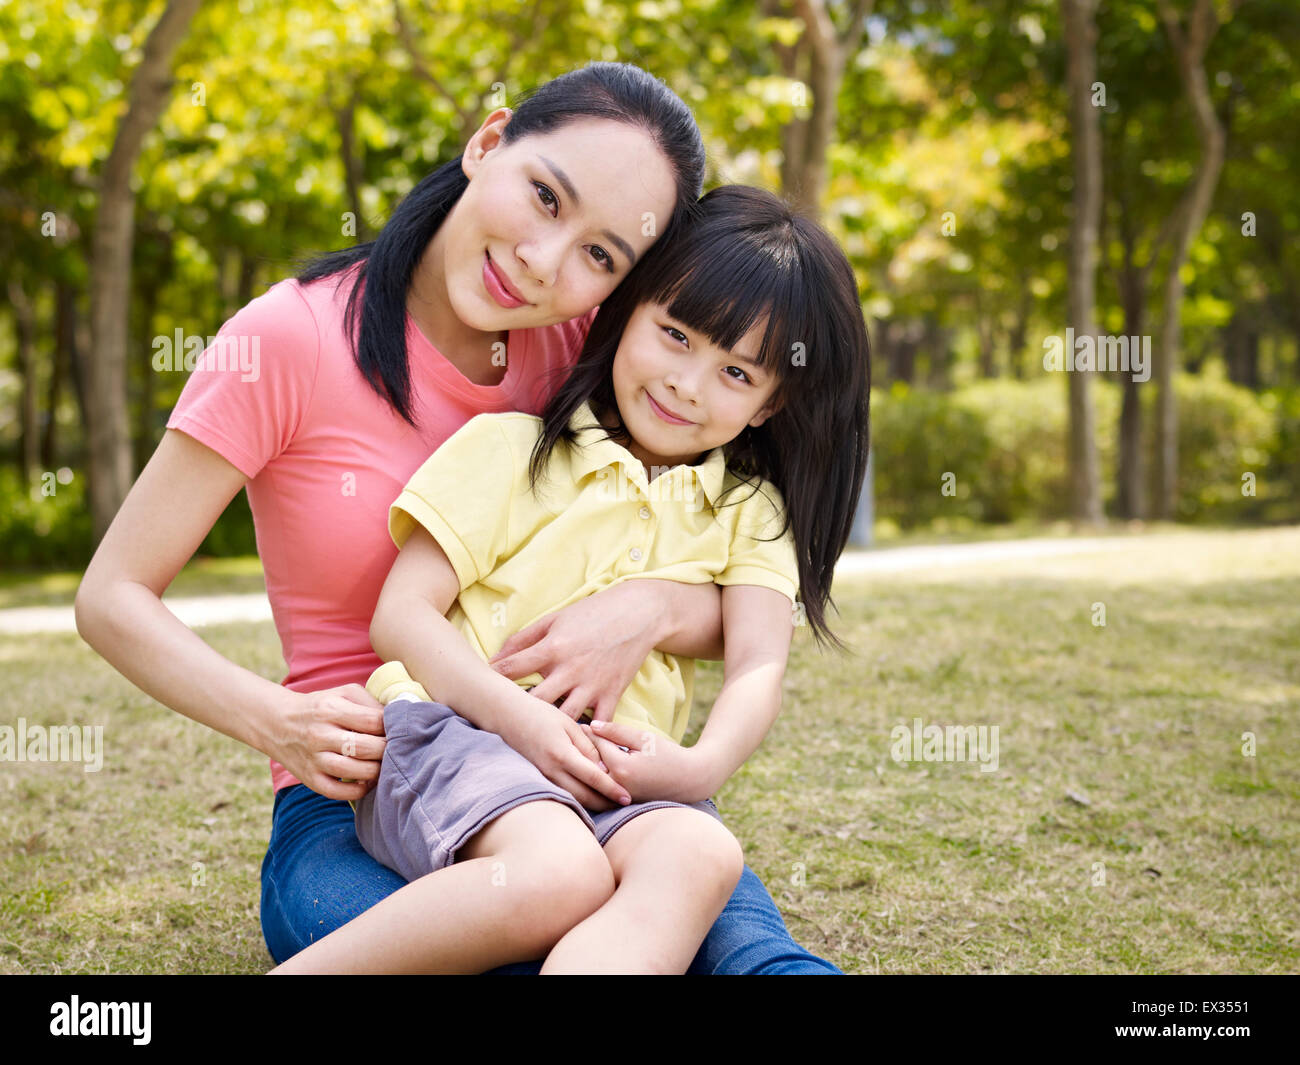 asian mother and daughter Stock Photo